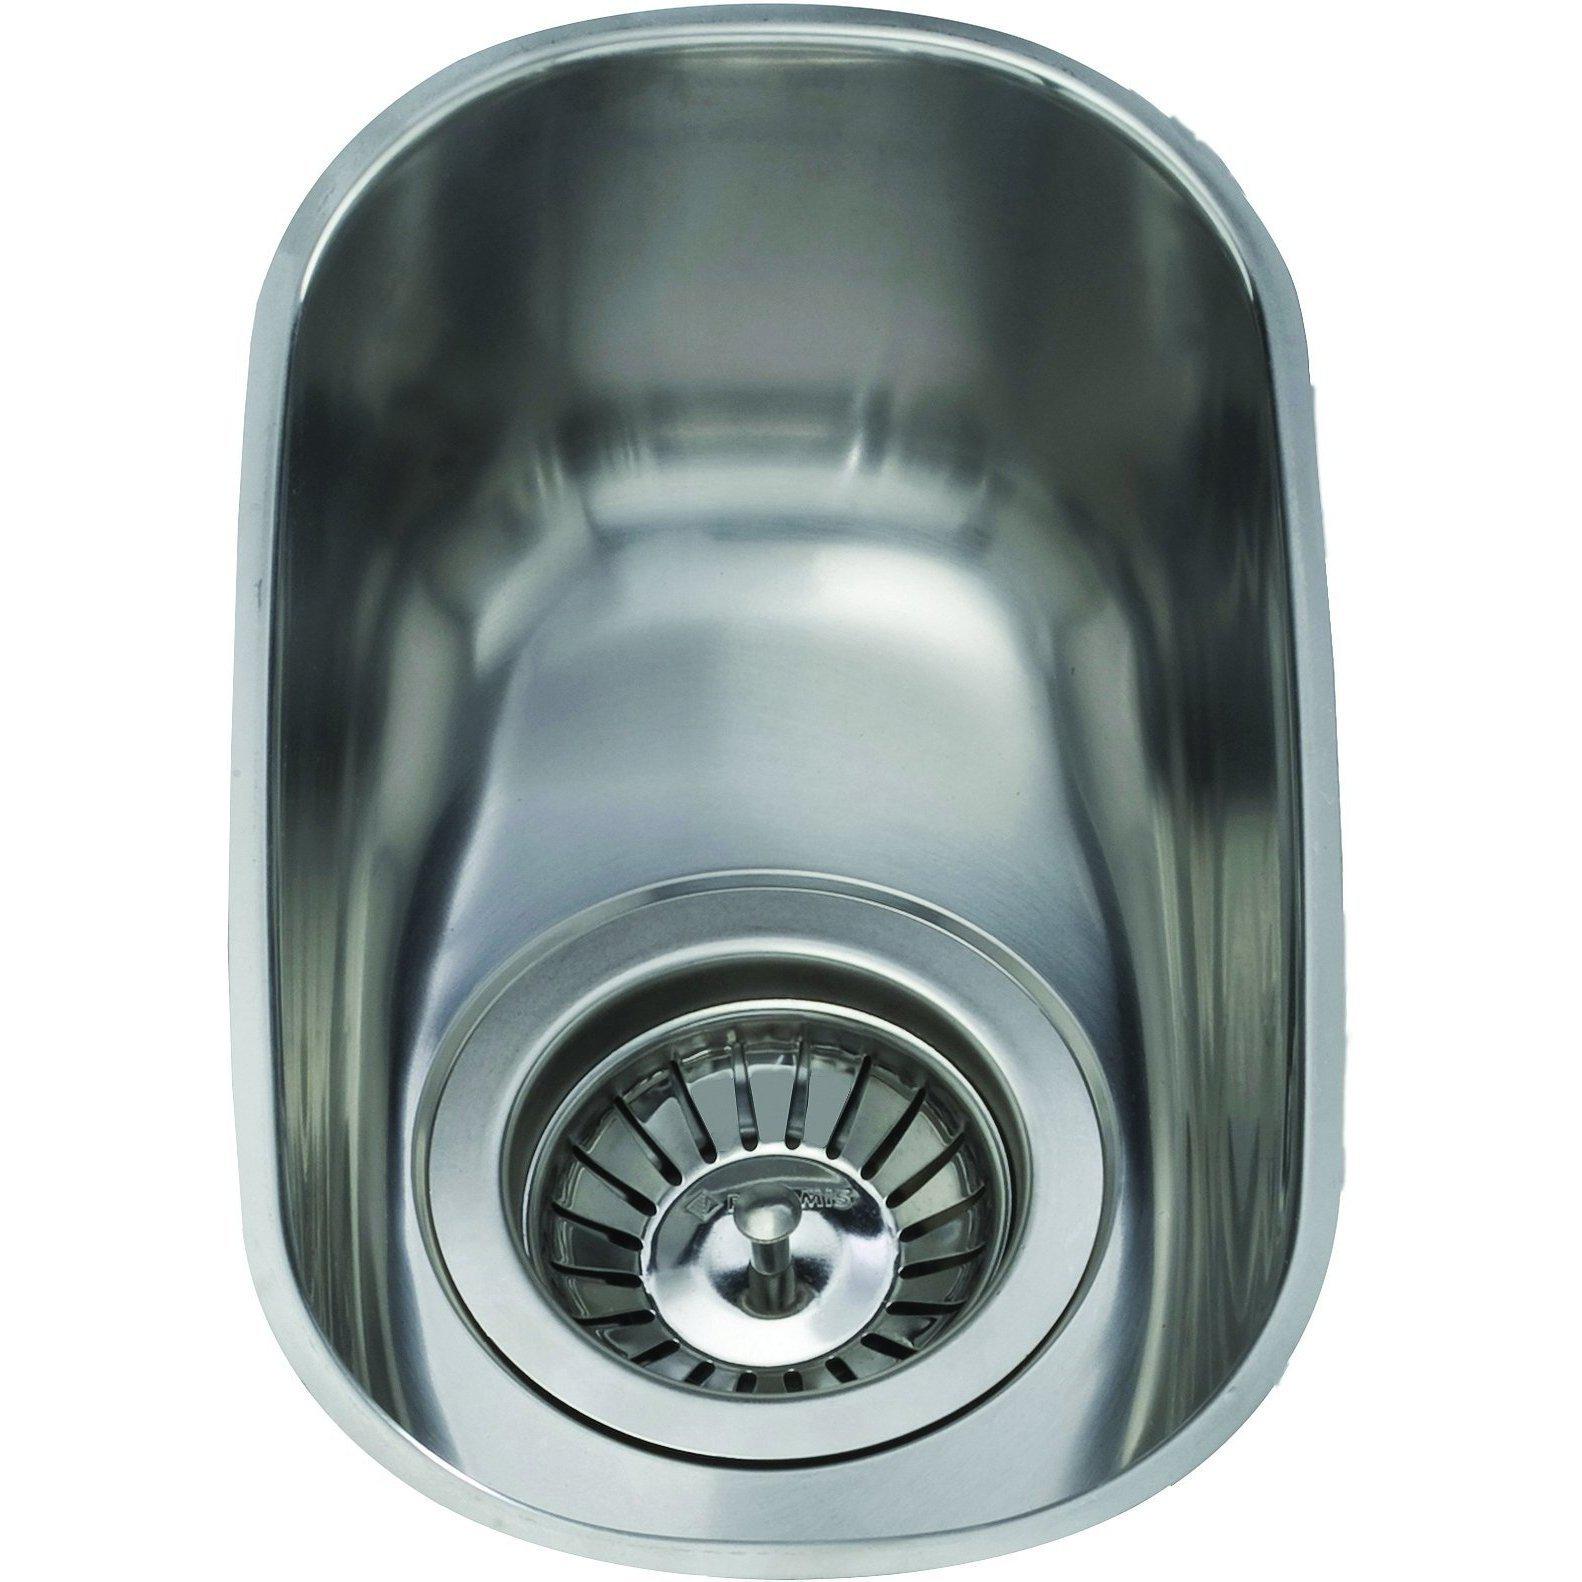 Cda Kcc21ss Undermount Curved Single Bowl Sink Stainless Steel